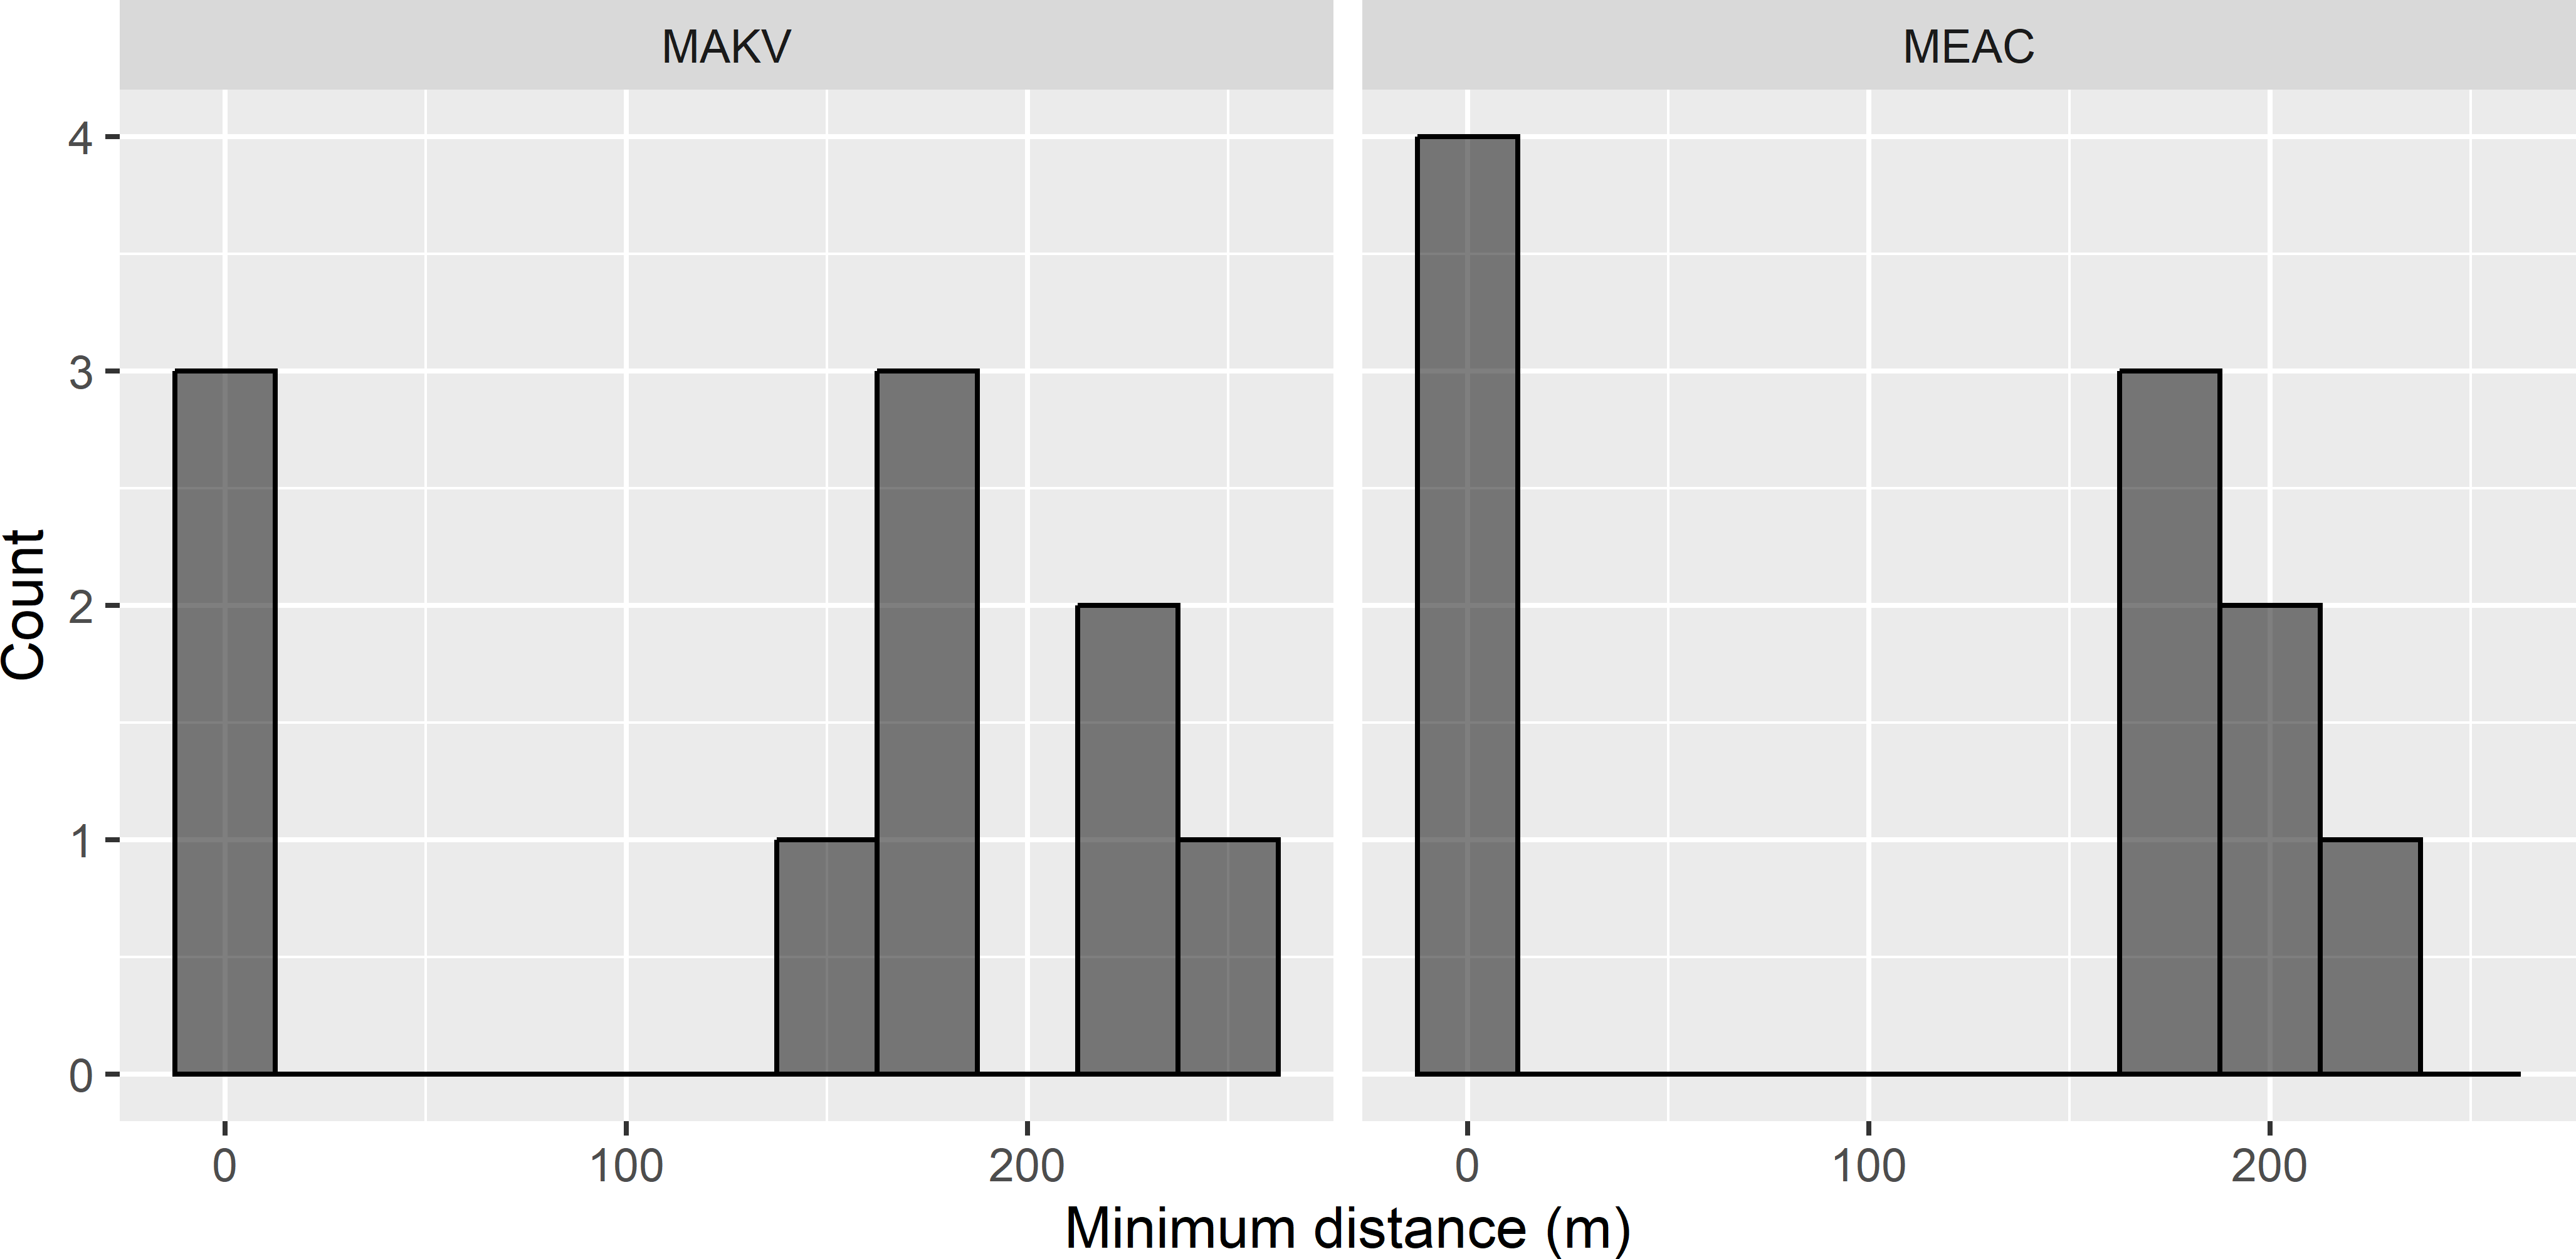 Frequency distributions of the shortest distance to the spatial coverage sample of the supplemental sample, optimised with the mean augmented kriging variance (MAKV) and the mean estimation adjusted criterion (MEAC).